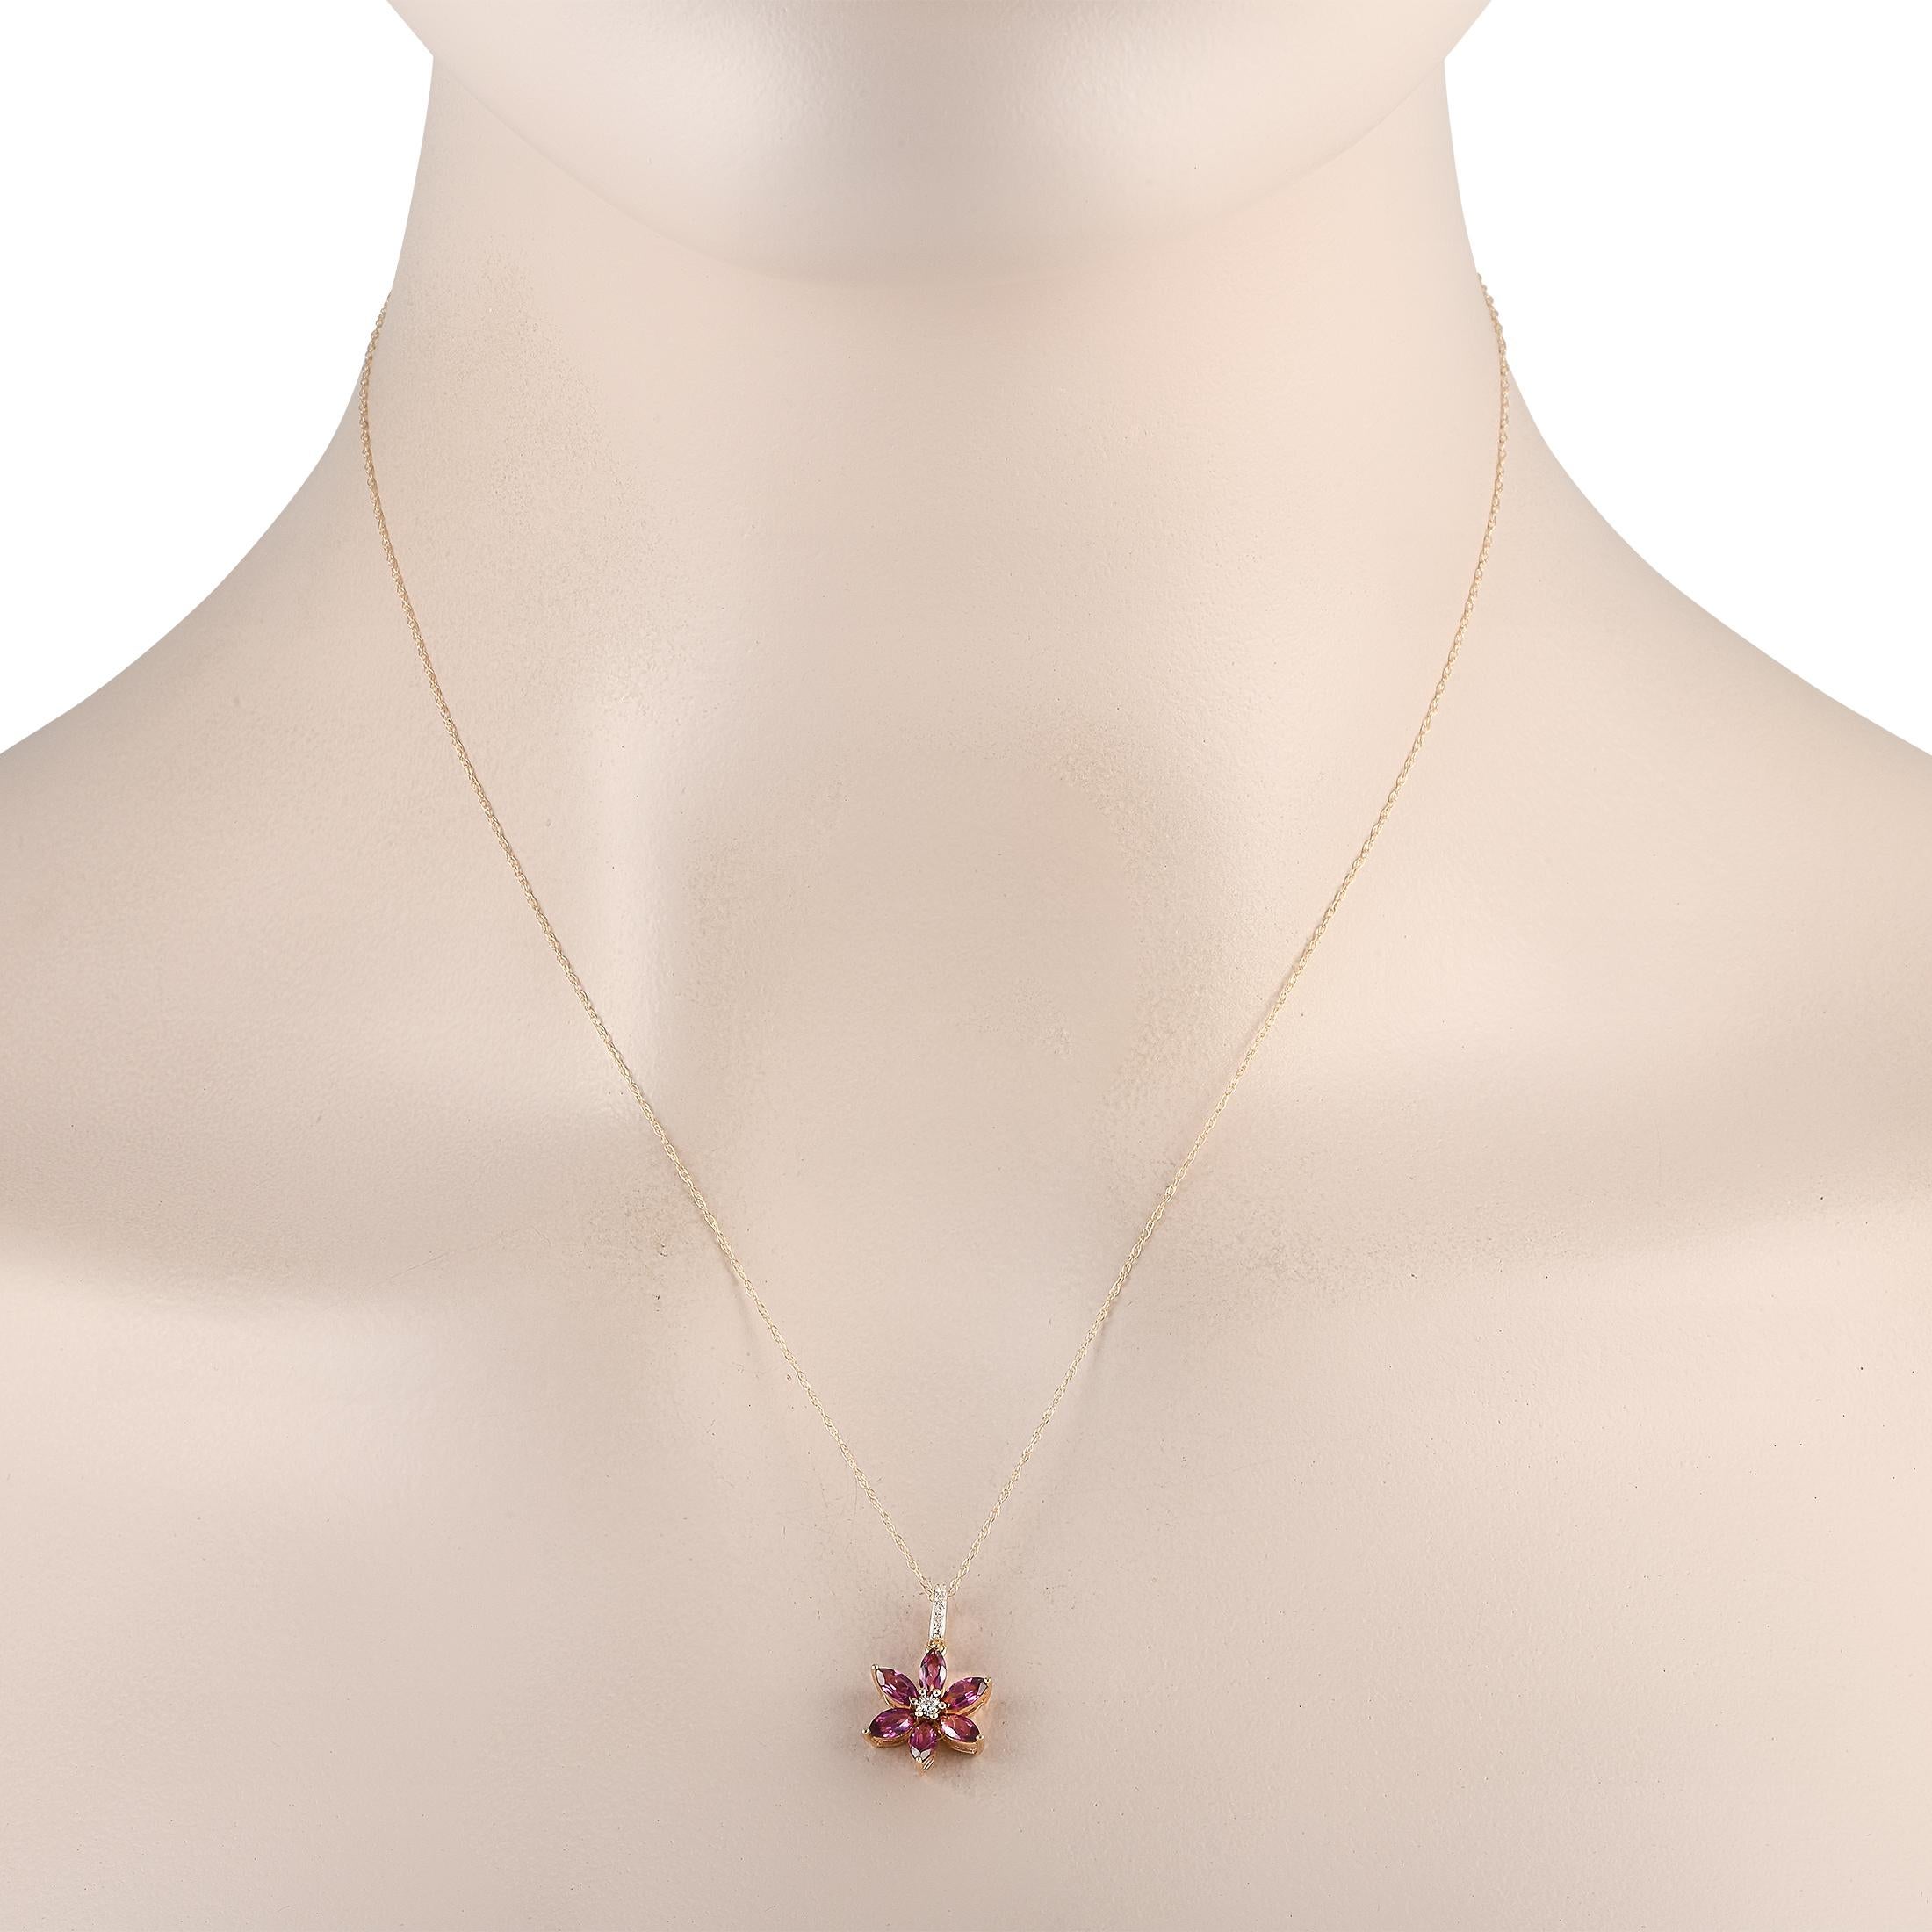 Your style is sure to bloom when you wear this diamond and rhodolite floral necklace. This LB Exclusive piece in 14K yellow gold features a diamond-traced bail holding a six-petal pendant measuring 0.75 by 0.50. The flower pendant has a diamond